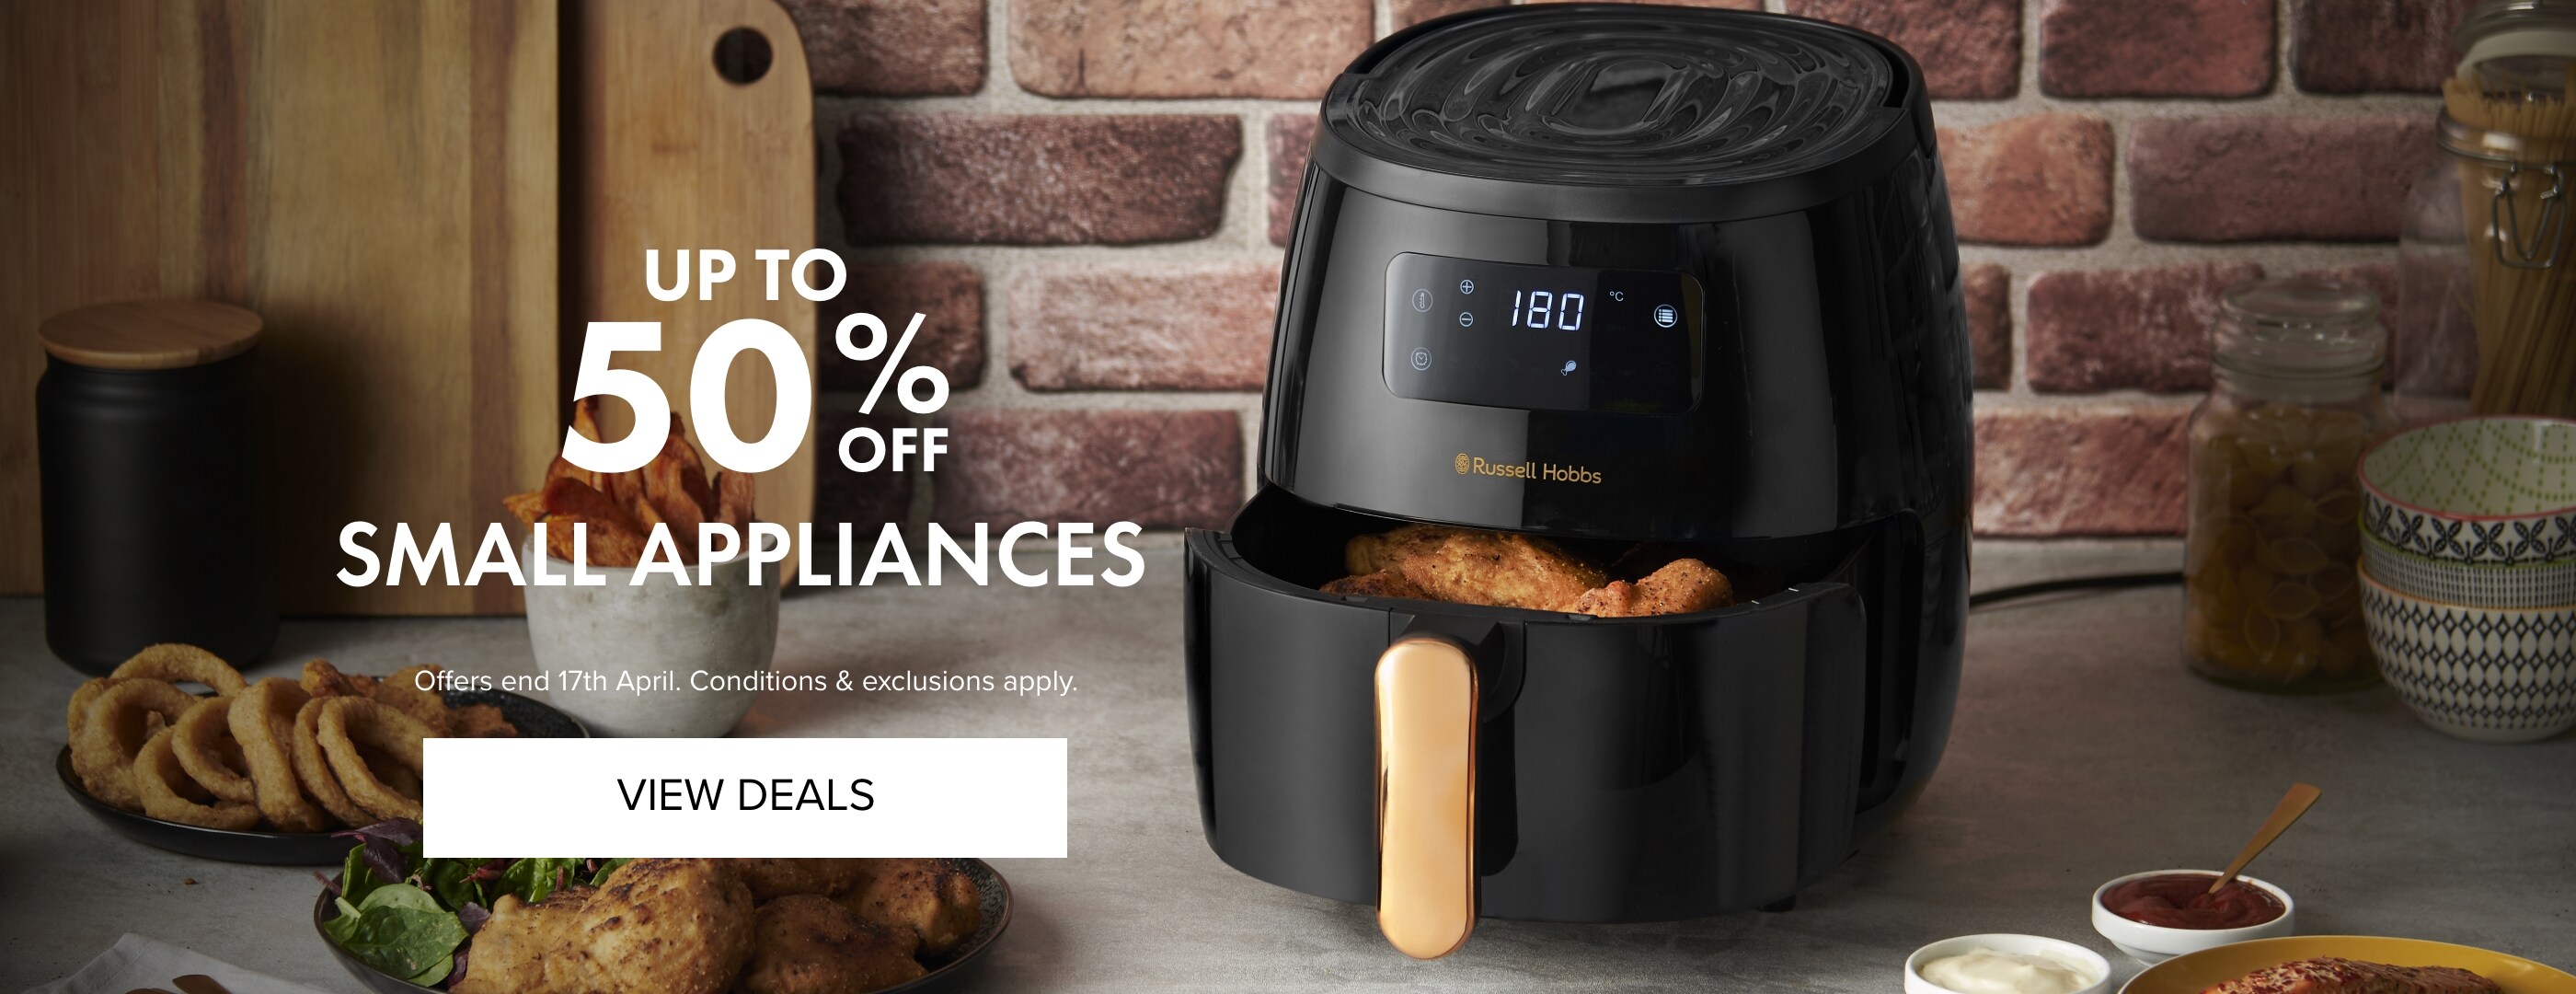 UP TO 50% OFF Small Appliances